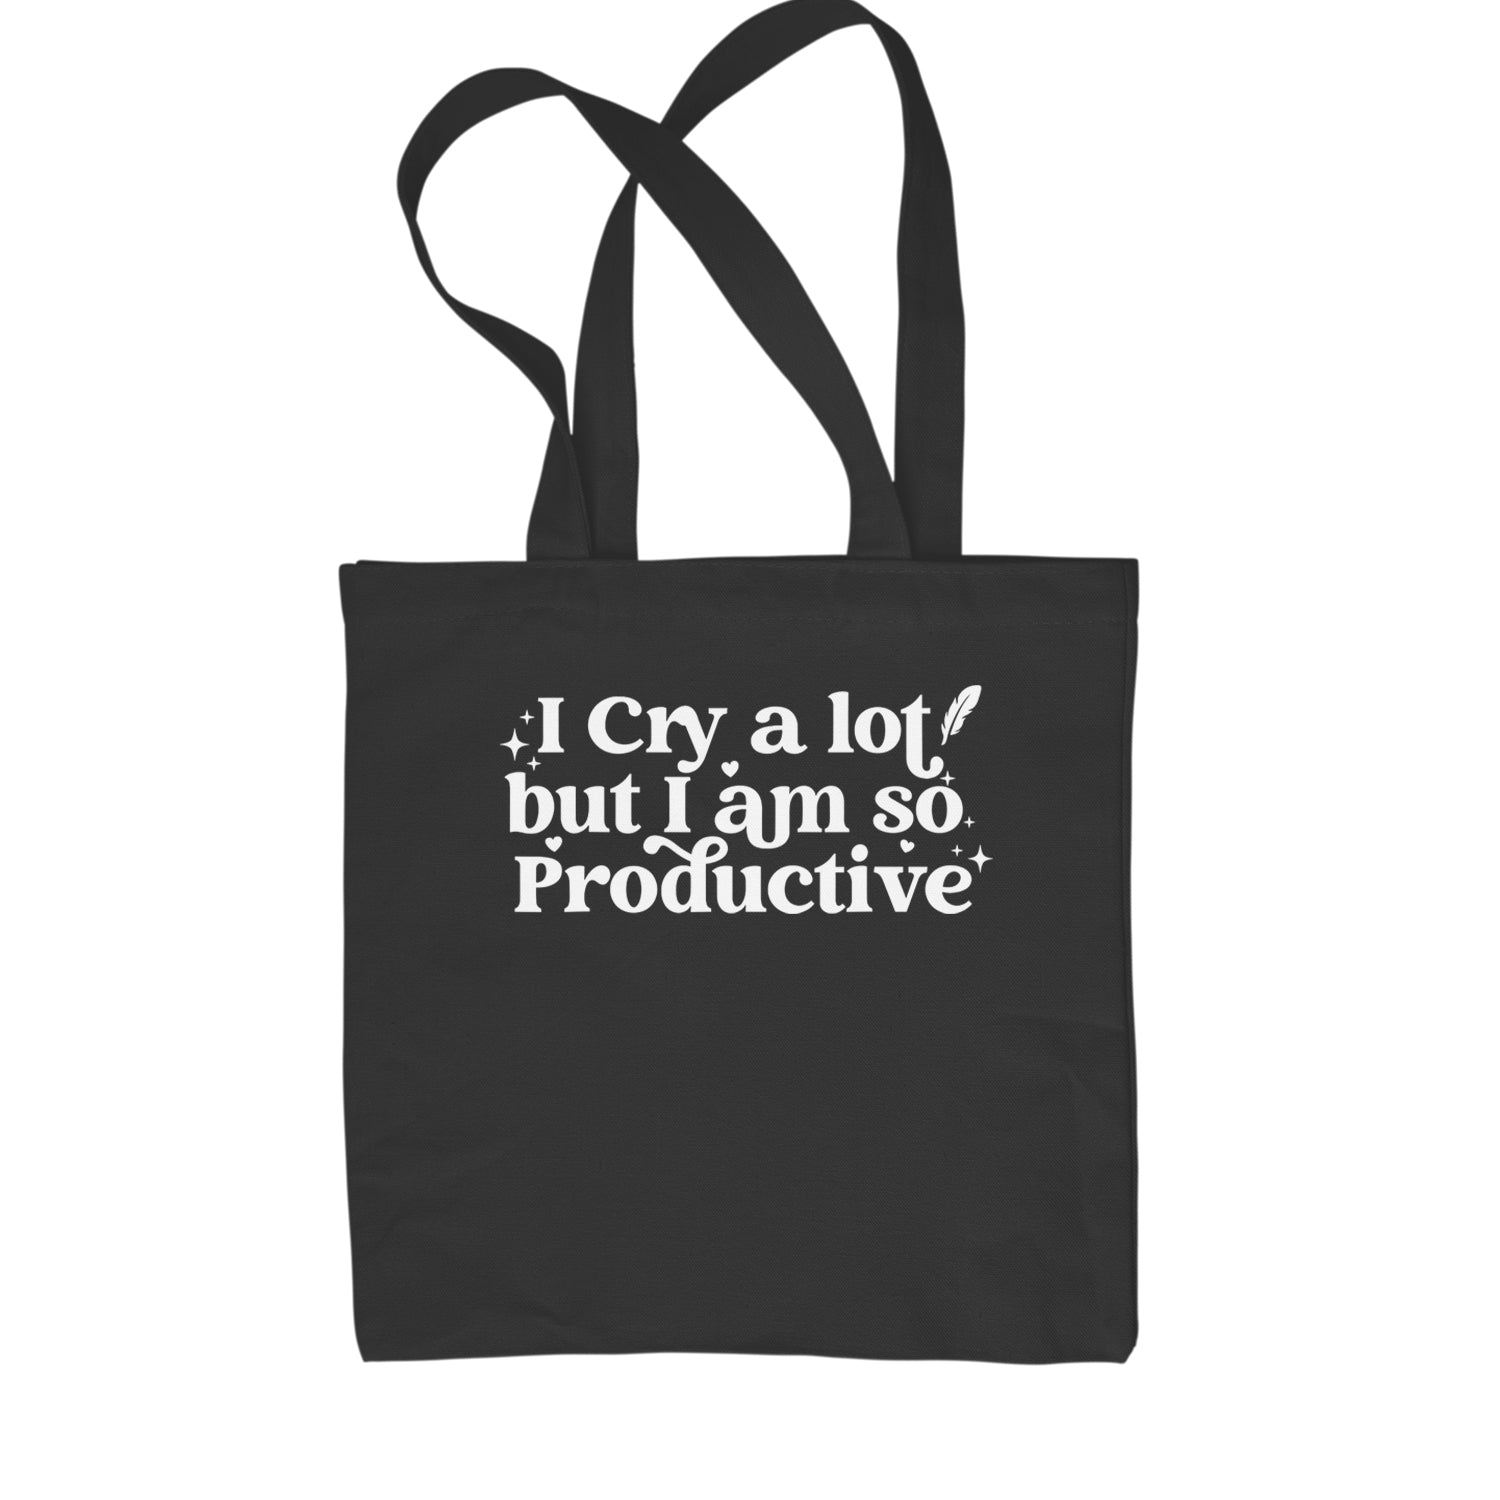 I Cry A Lot But I am So Productive TTPD Shopping Tote Bag